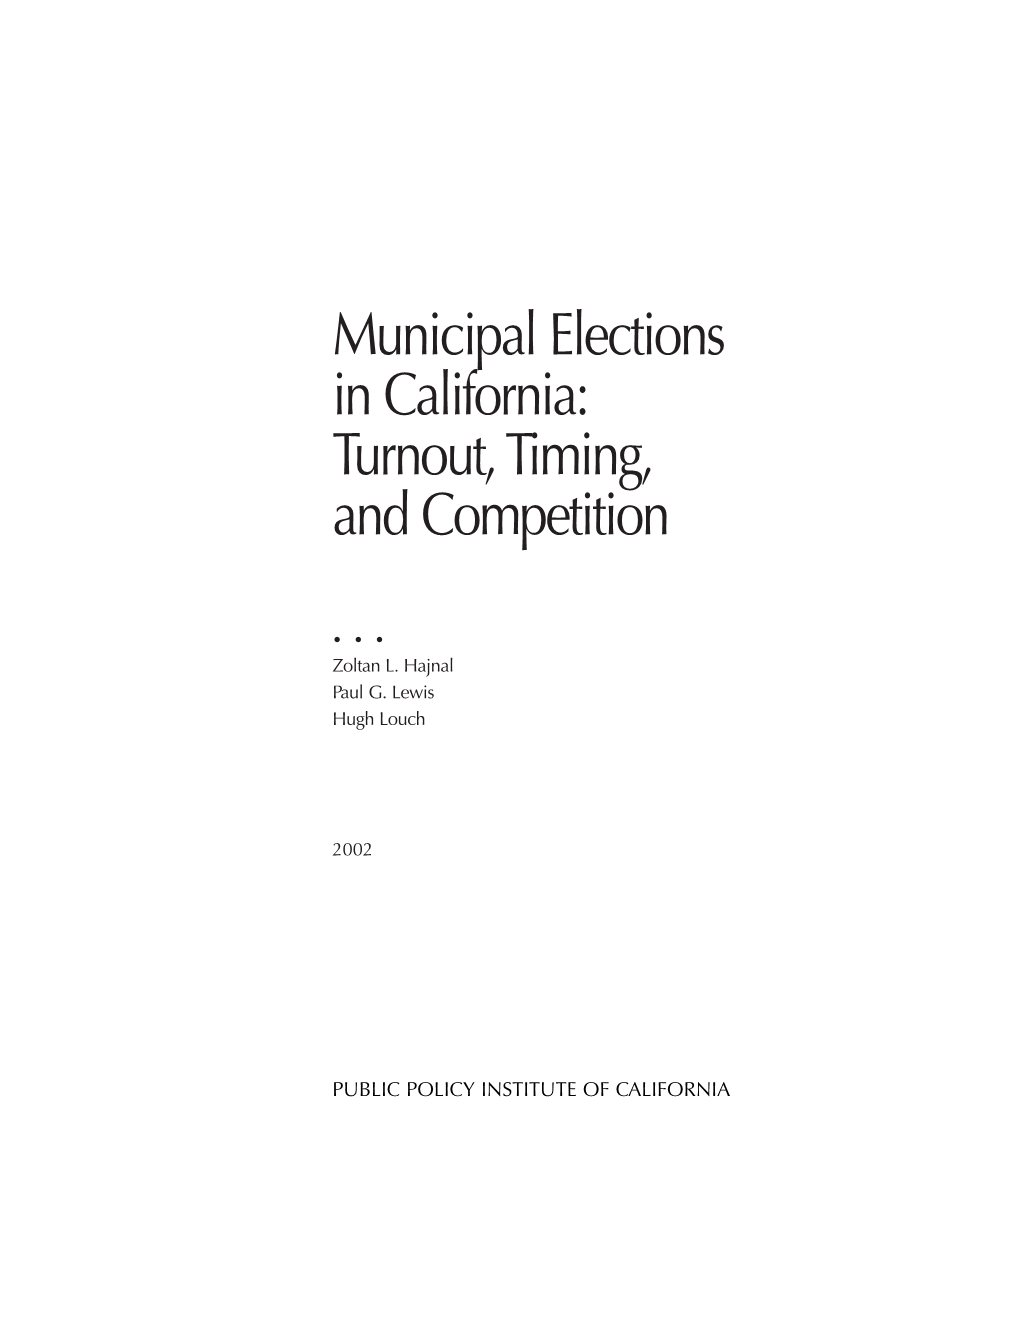 Municipal Elections in California: Turnout, Timing, and Competition